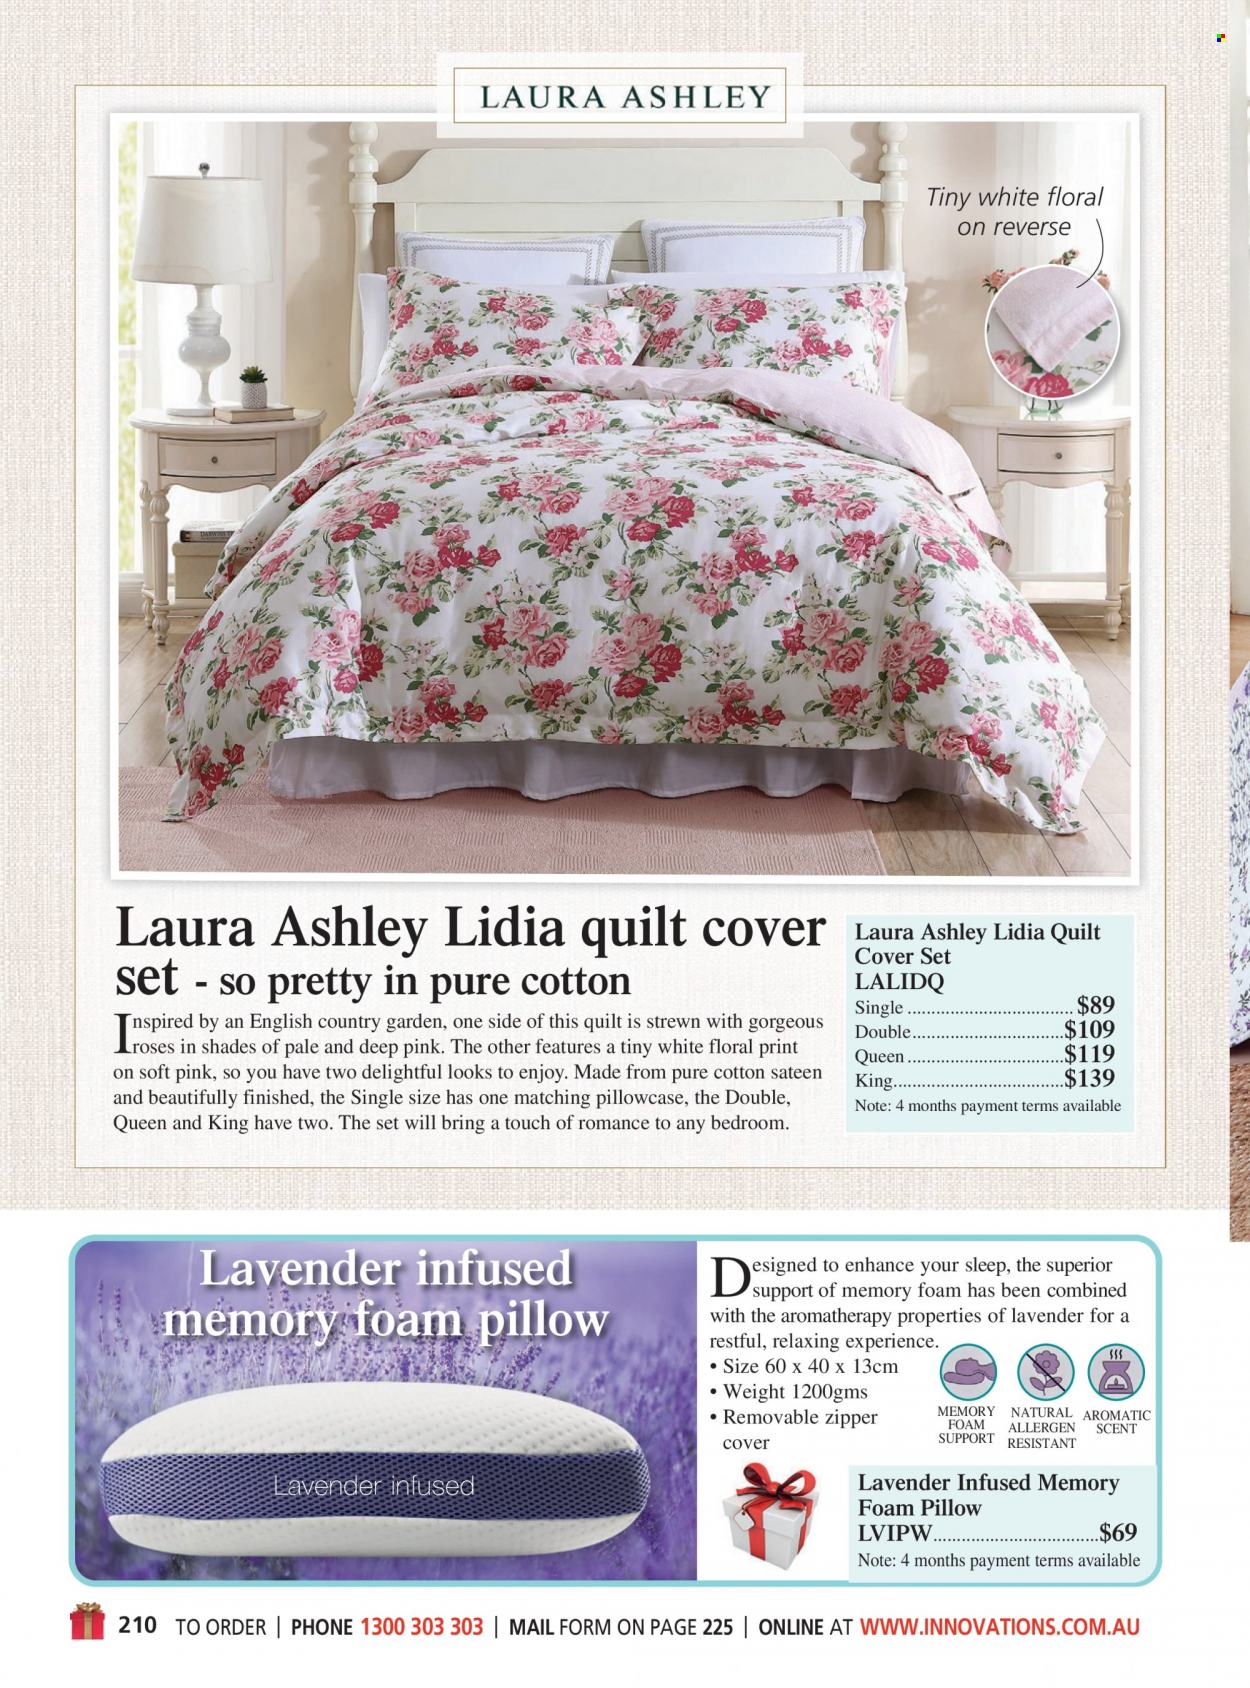 thumbnail - Innovations Catalogue - Sales products - pillow, pillowcase, quilt, foam pillow, quilt cover set. Page 210.